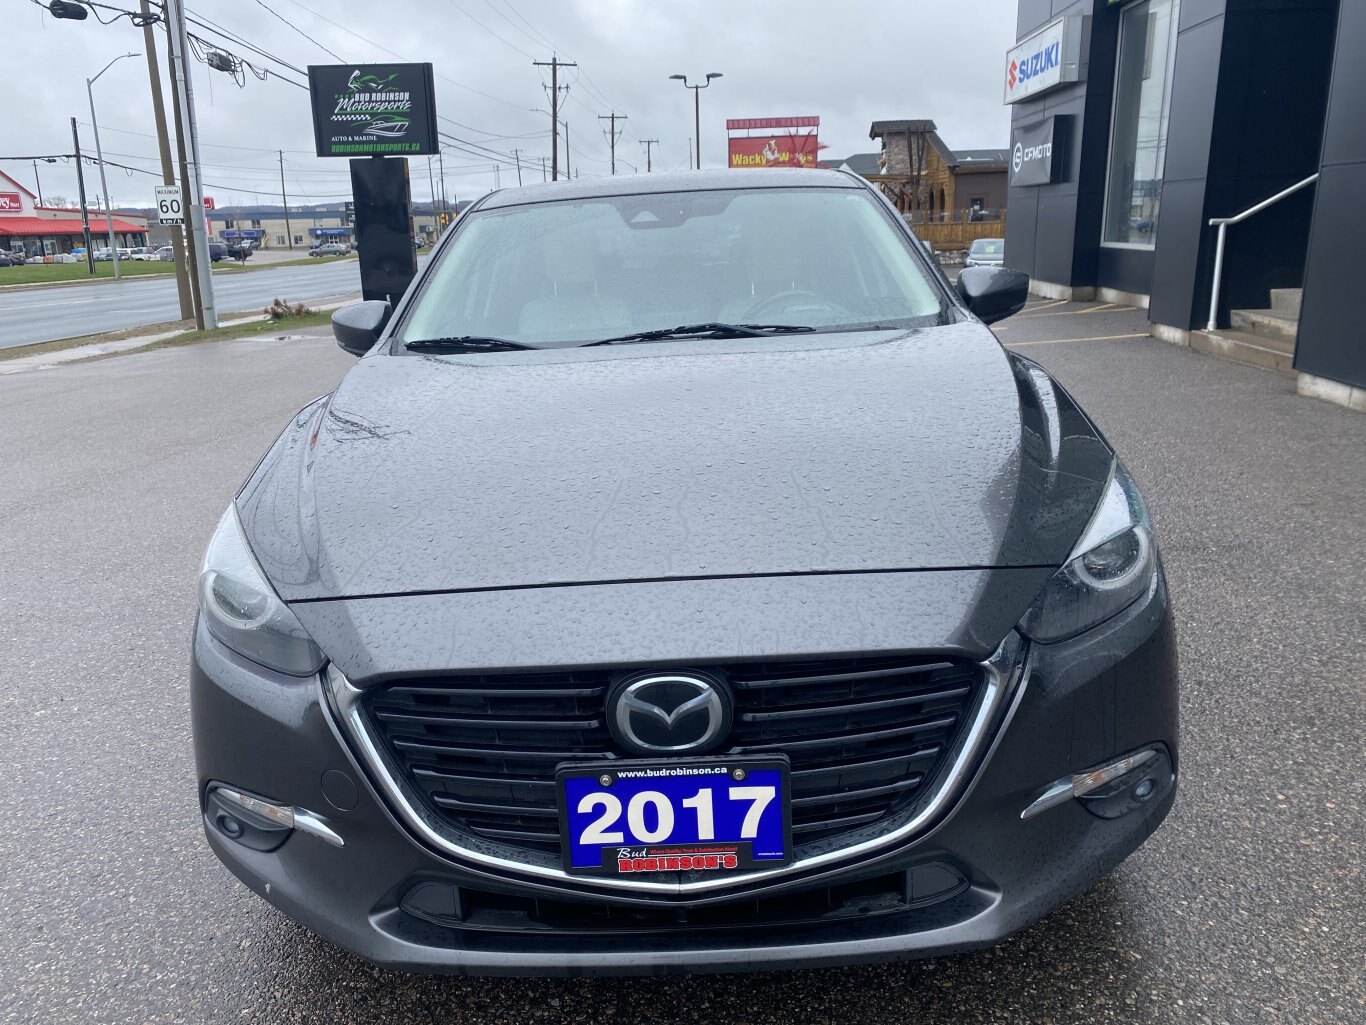 2017 MAZDA 3 GT FRONT WHEEL DRIVE WITH SUNROOF, LEATHER SEATS, HEATED SEATS, REAR VIEW CAMERA, HEATED STEERING WHEEL AND NAVIGATION!!